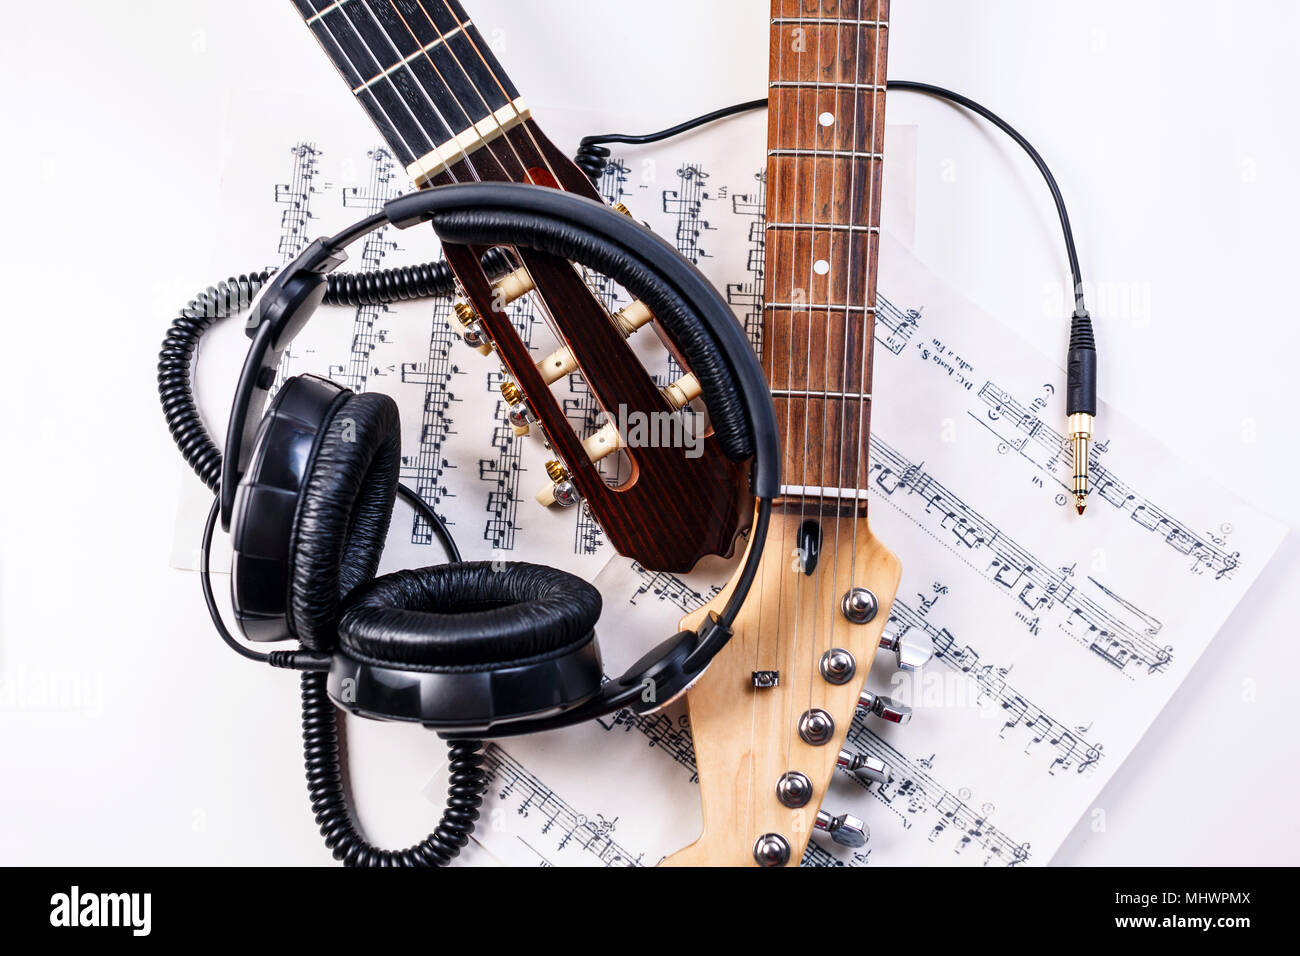 Electric guitar and headphones with music notes. Stock Photo